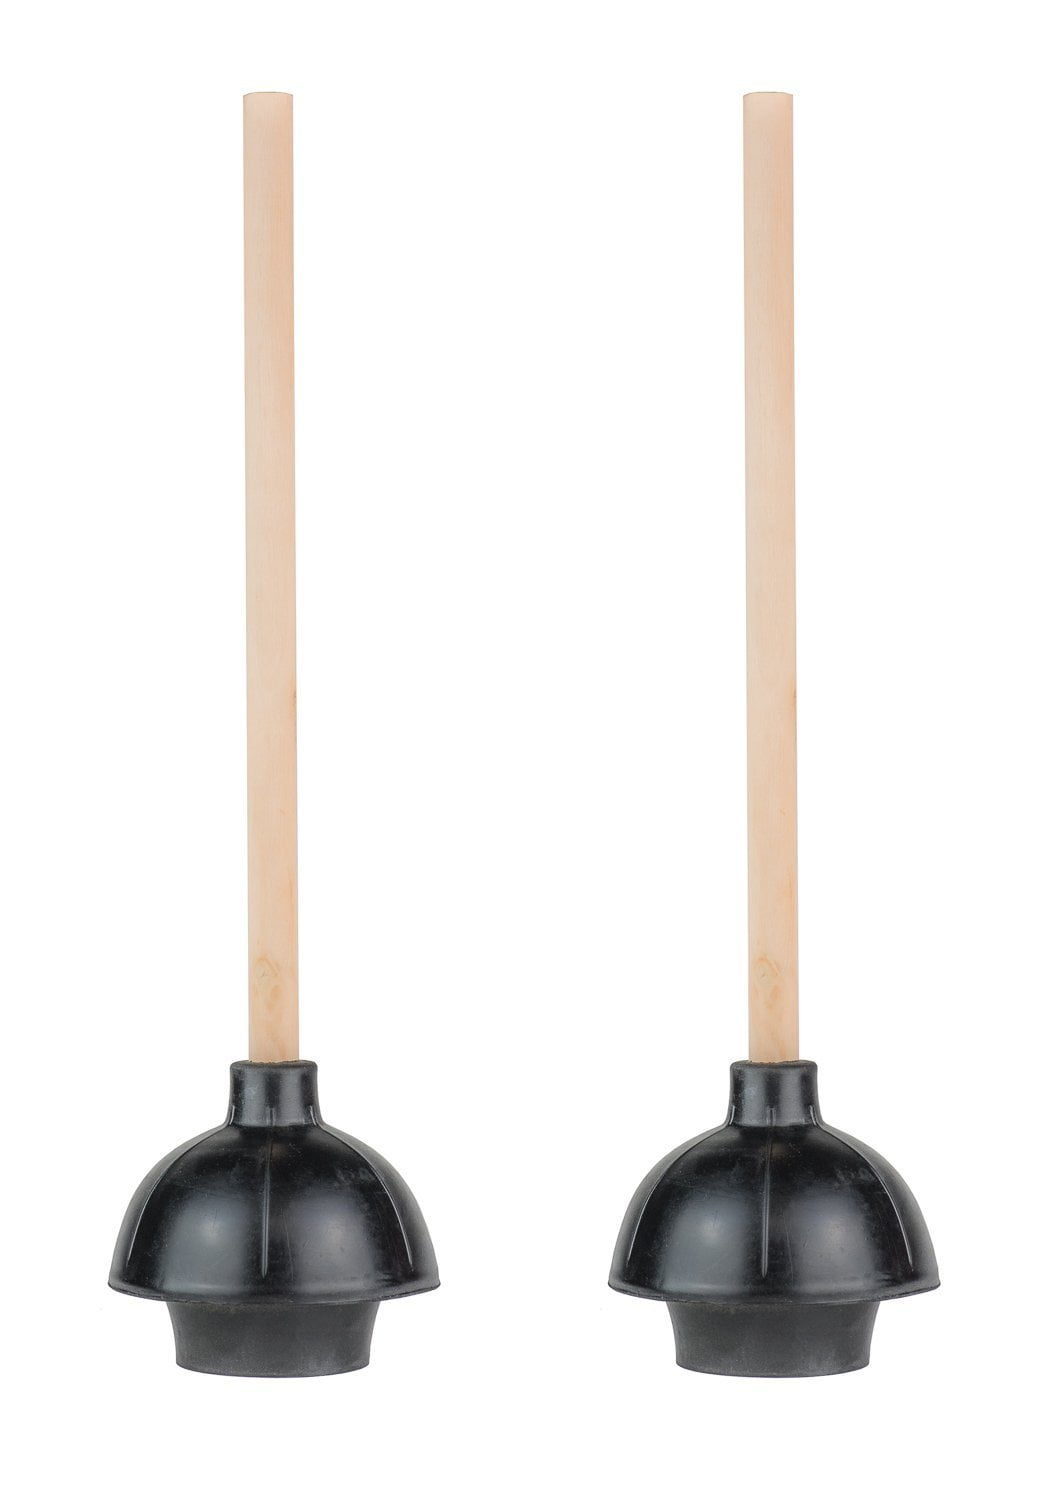 SteadMax Rubber Toilet Plunger Commercial Grade with 18” Wood Handle Double Thrust Force Cup Heavy Duty 